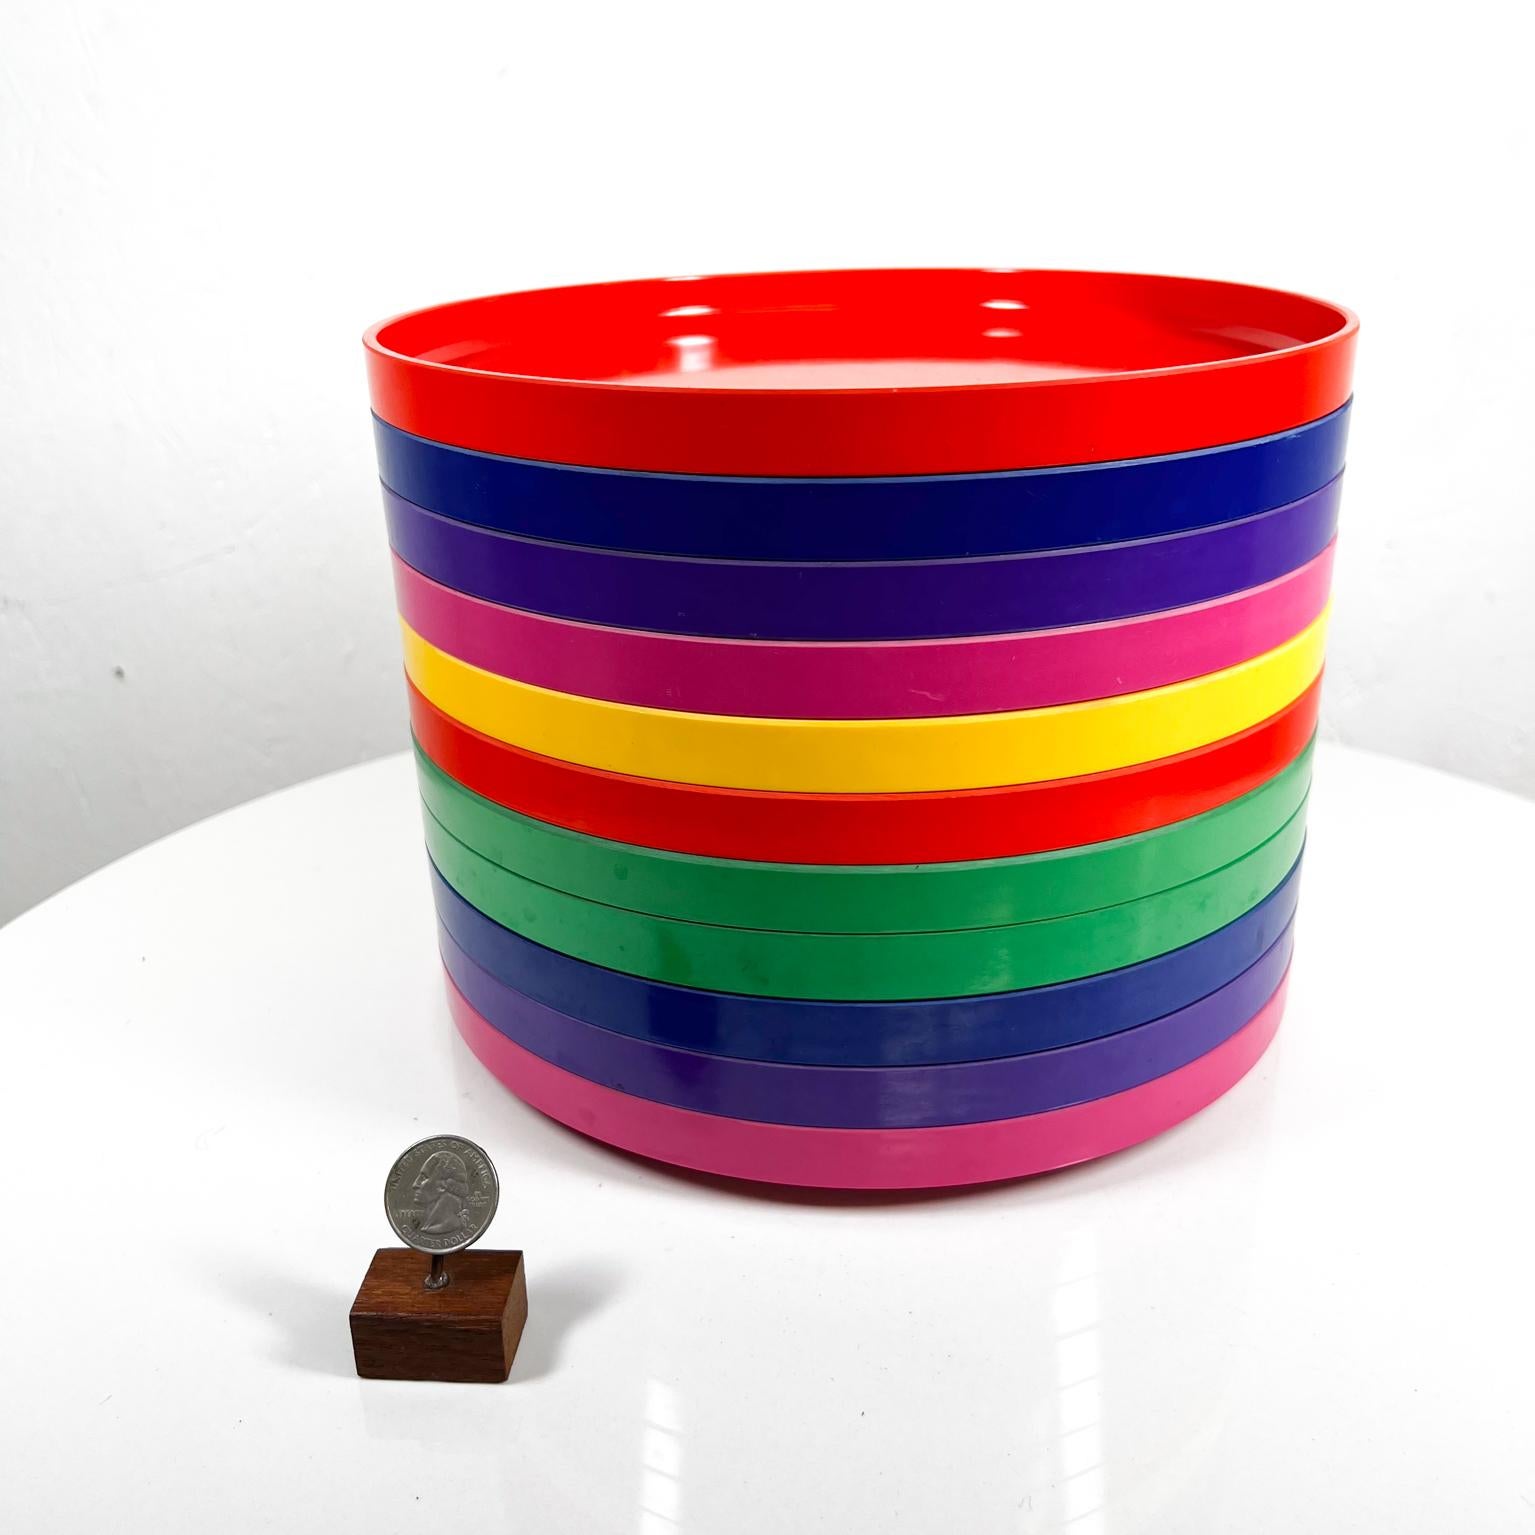 1964 MoMA Massimo & Lella Vignelli 11 Stackable Color Plates Heller Design
9.88 diameter x 1 h
Preowned vintage condition
See all images.